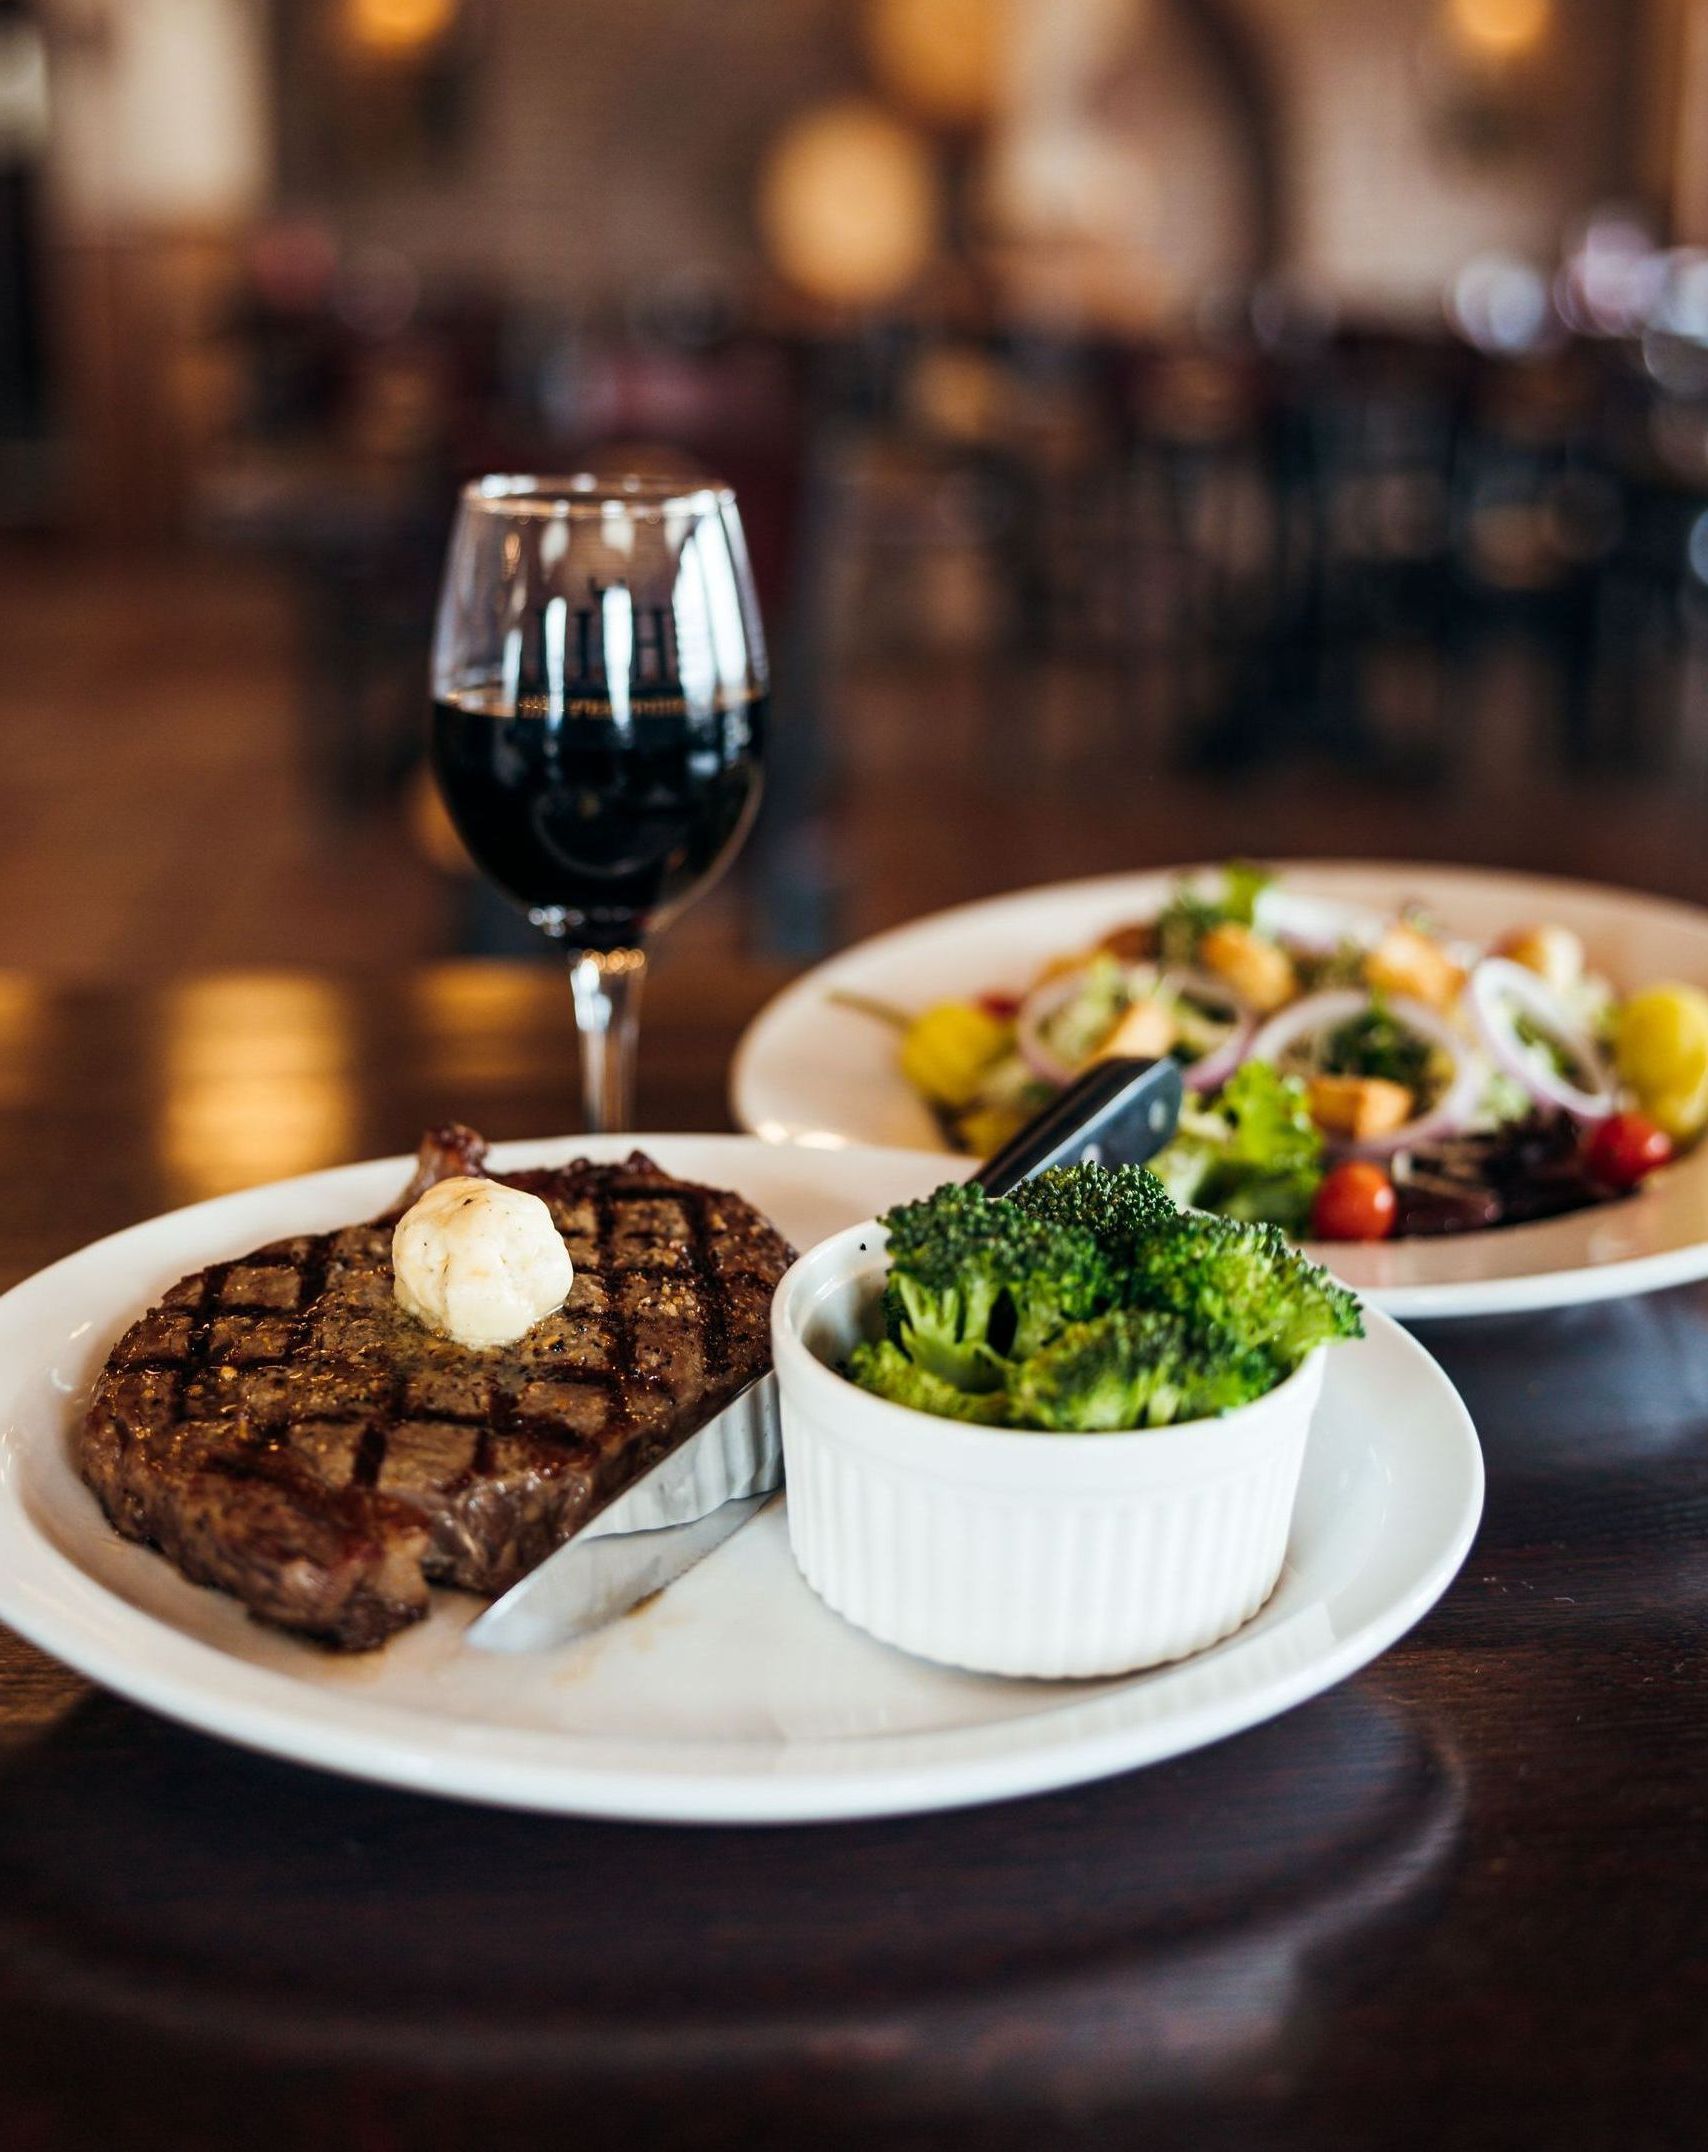 Delicious Entrees Are Always on the Menu at Canterbury Hill Winery & Restaurant in Holts Summit, MO.